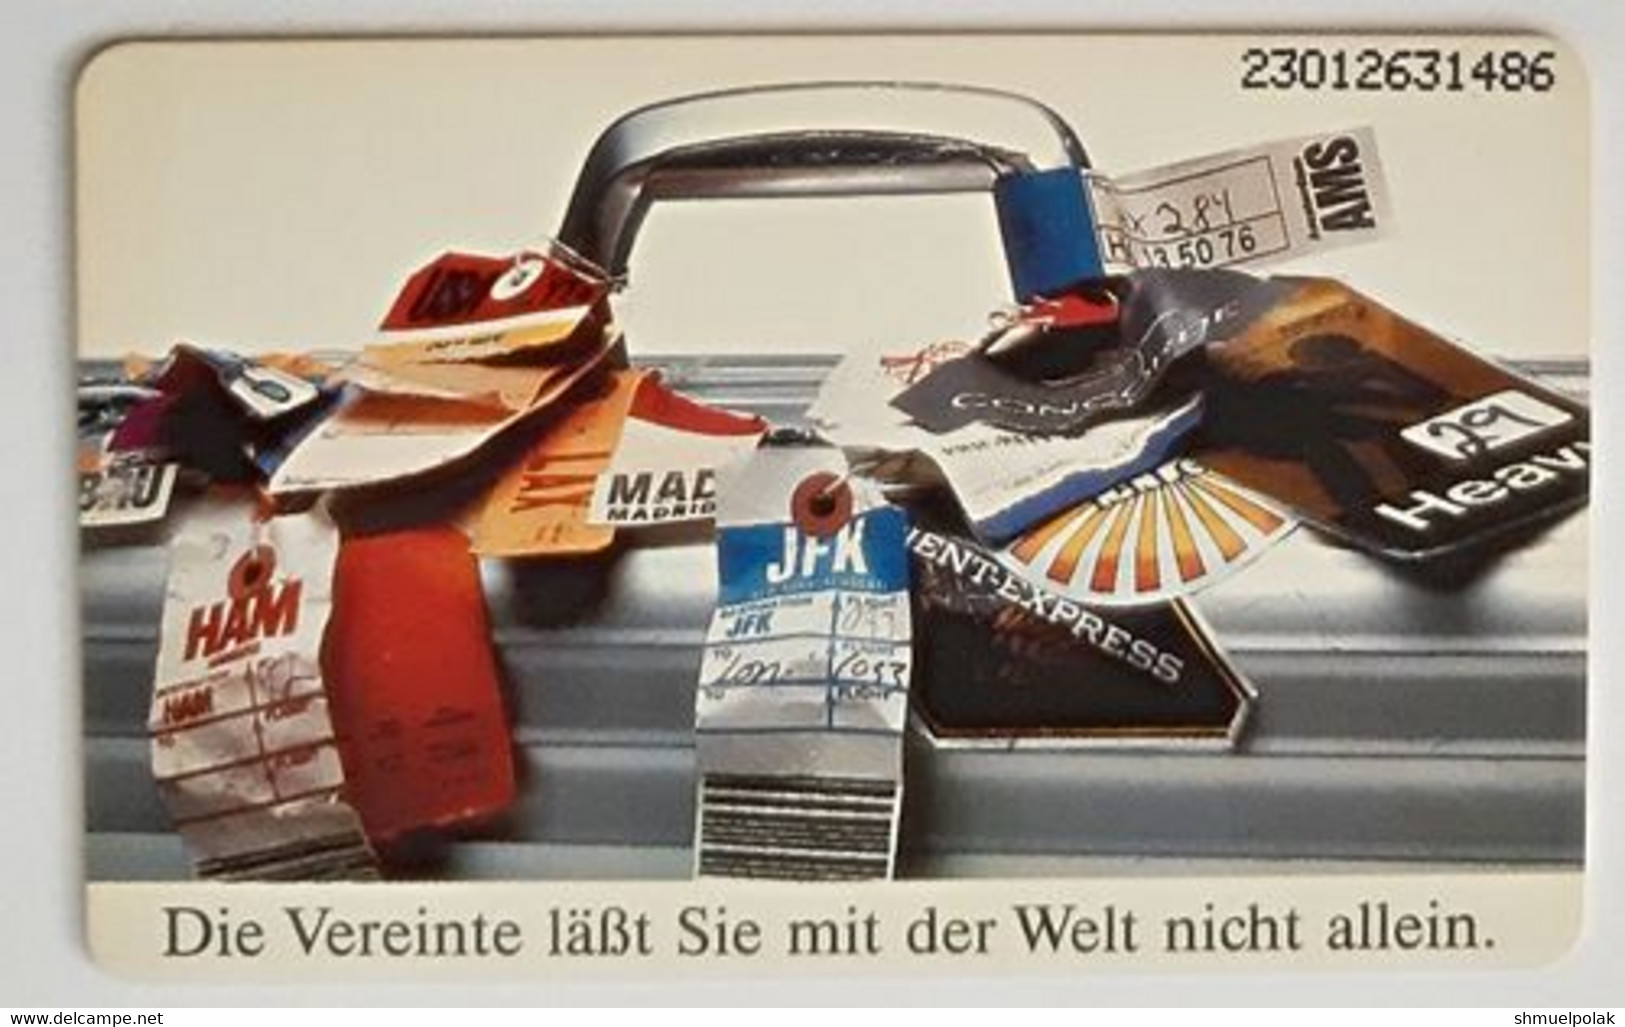 GERMANY Phone Card Telefonkarte Deutsche Telkom 1993 6DM 31000 Units Have Been Issued - Other & Unclassified